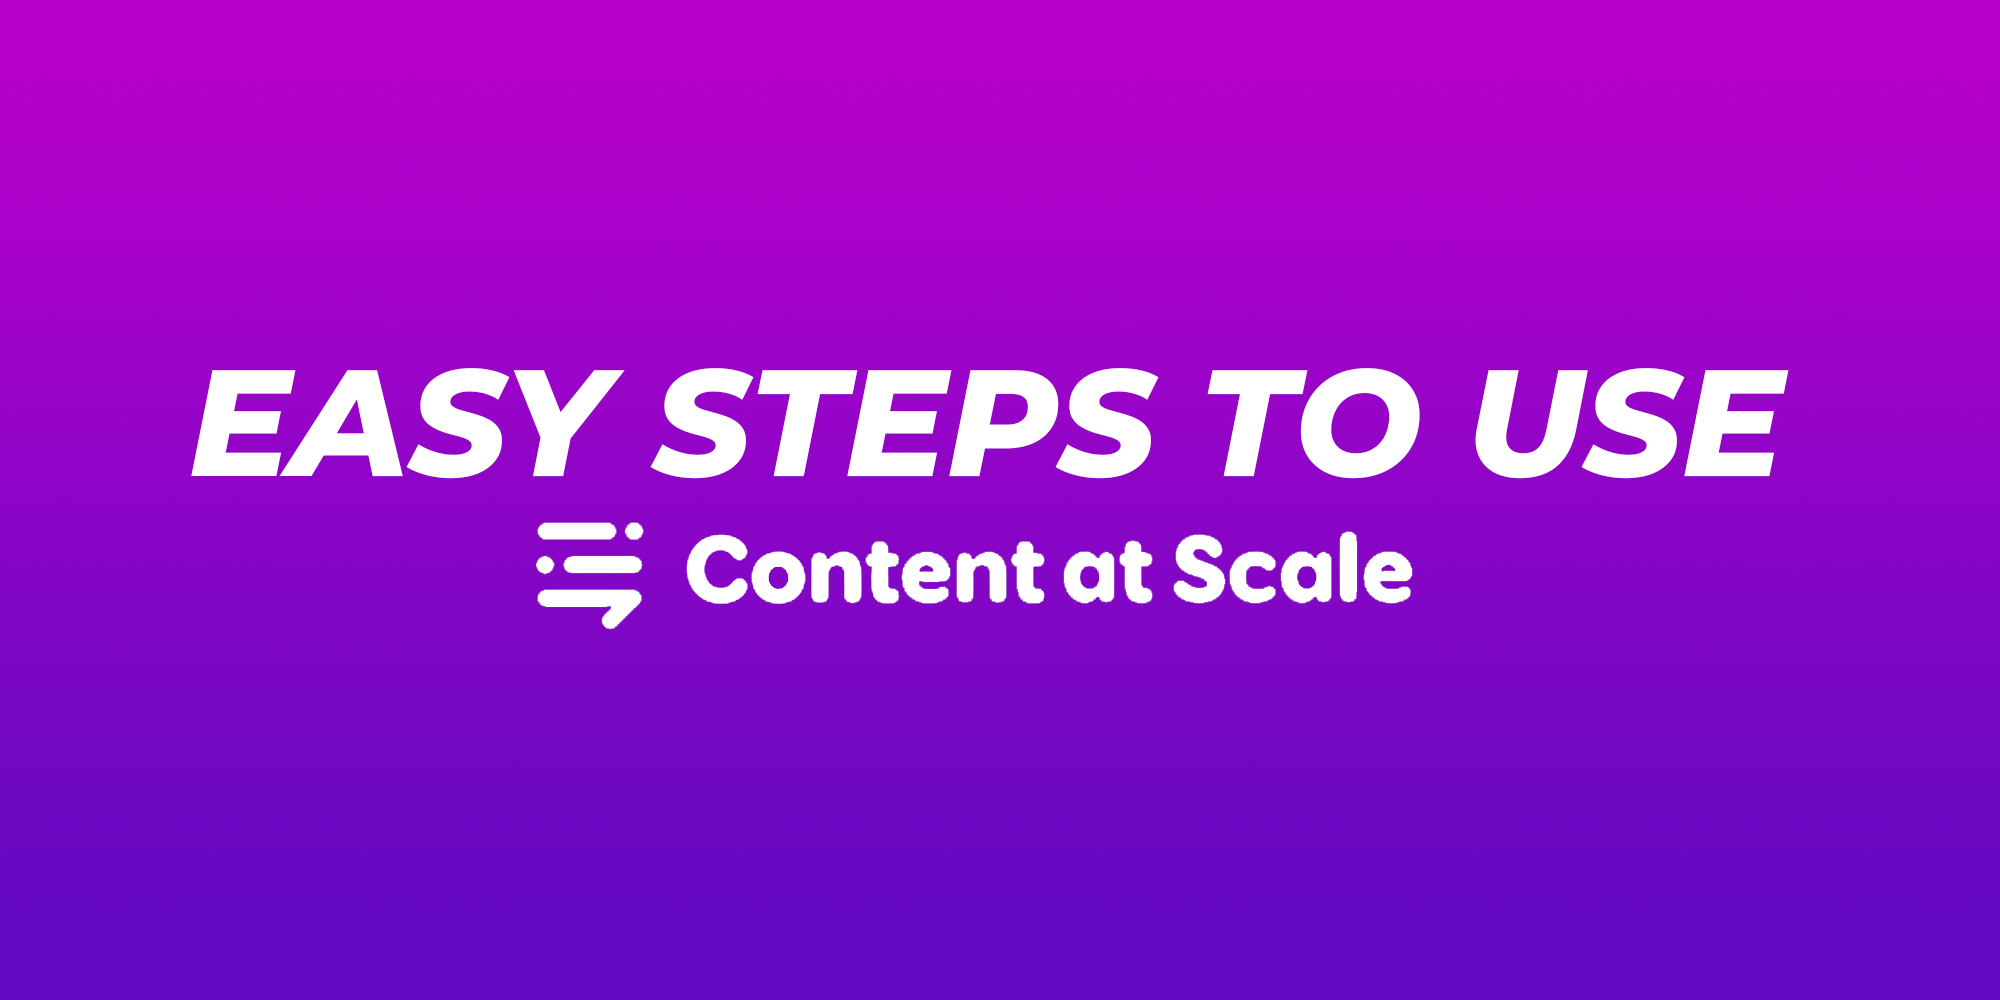 Content at scale